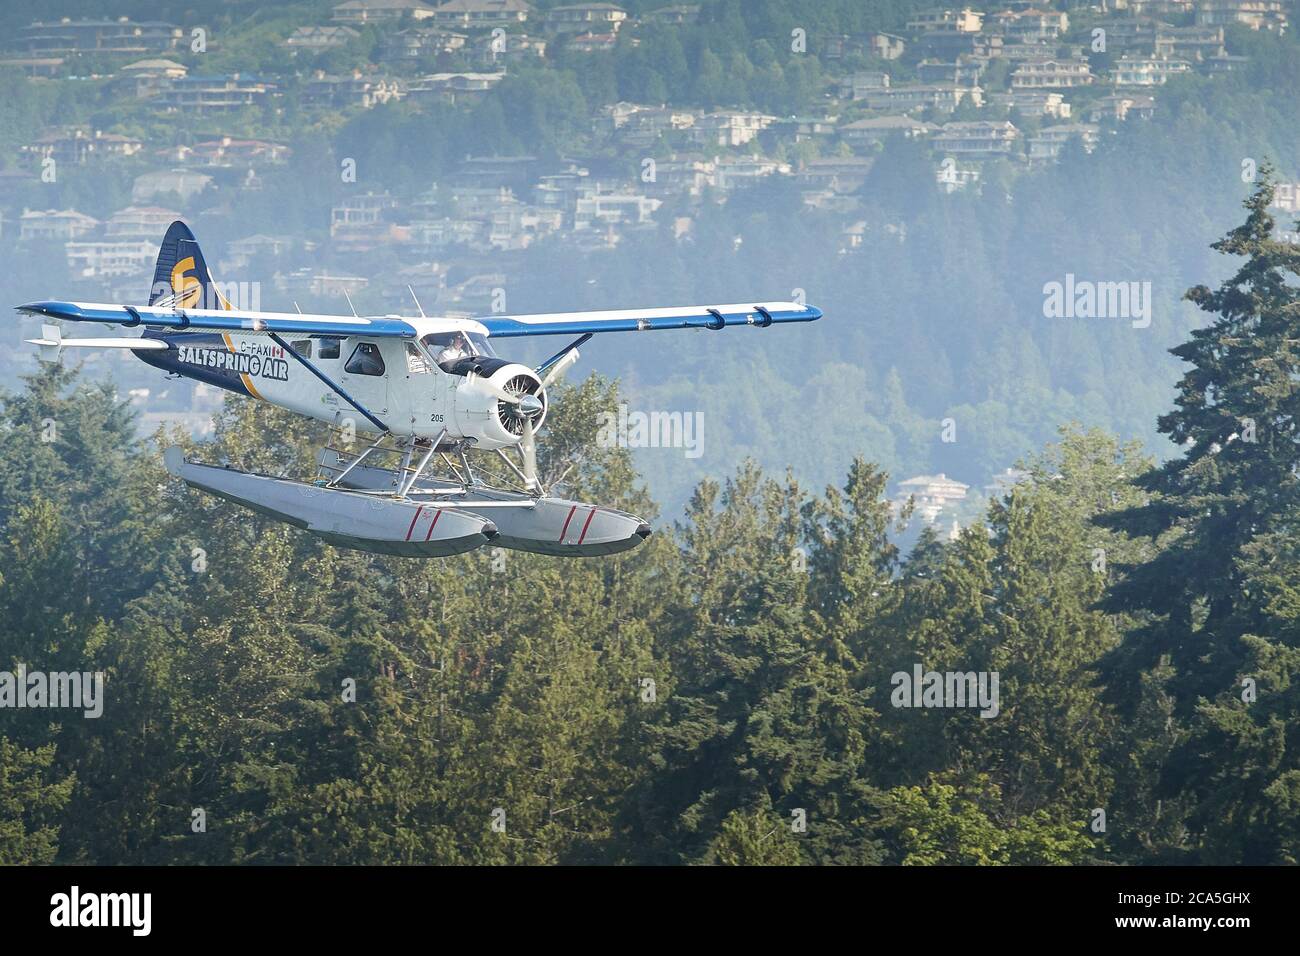 Saltspring Air DHC-2 Beaver On Its Final Approach To The Vancouver Harbour Flight Centre, BC, Canada. Stock Photo